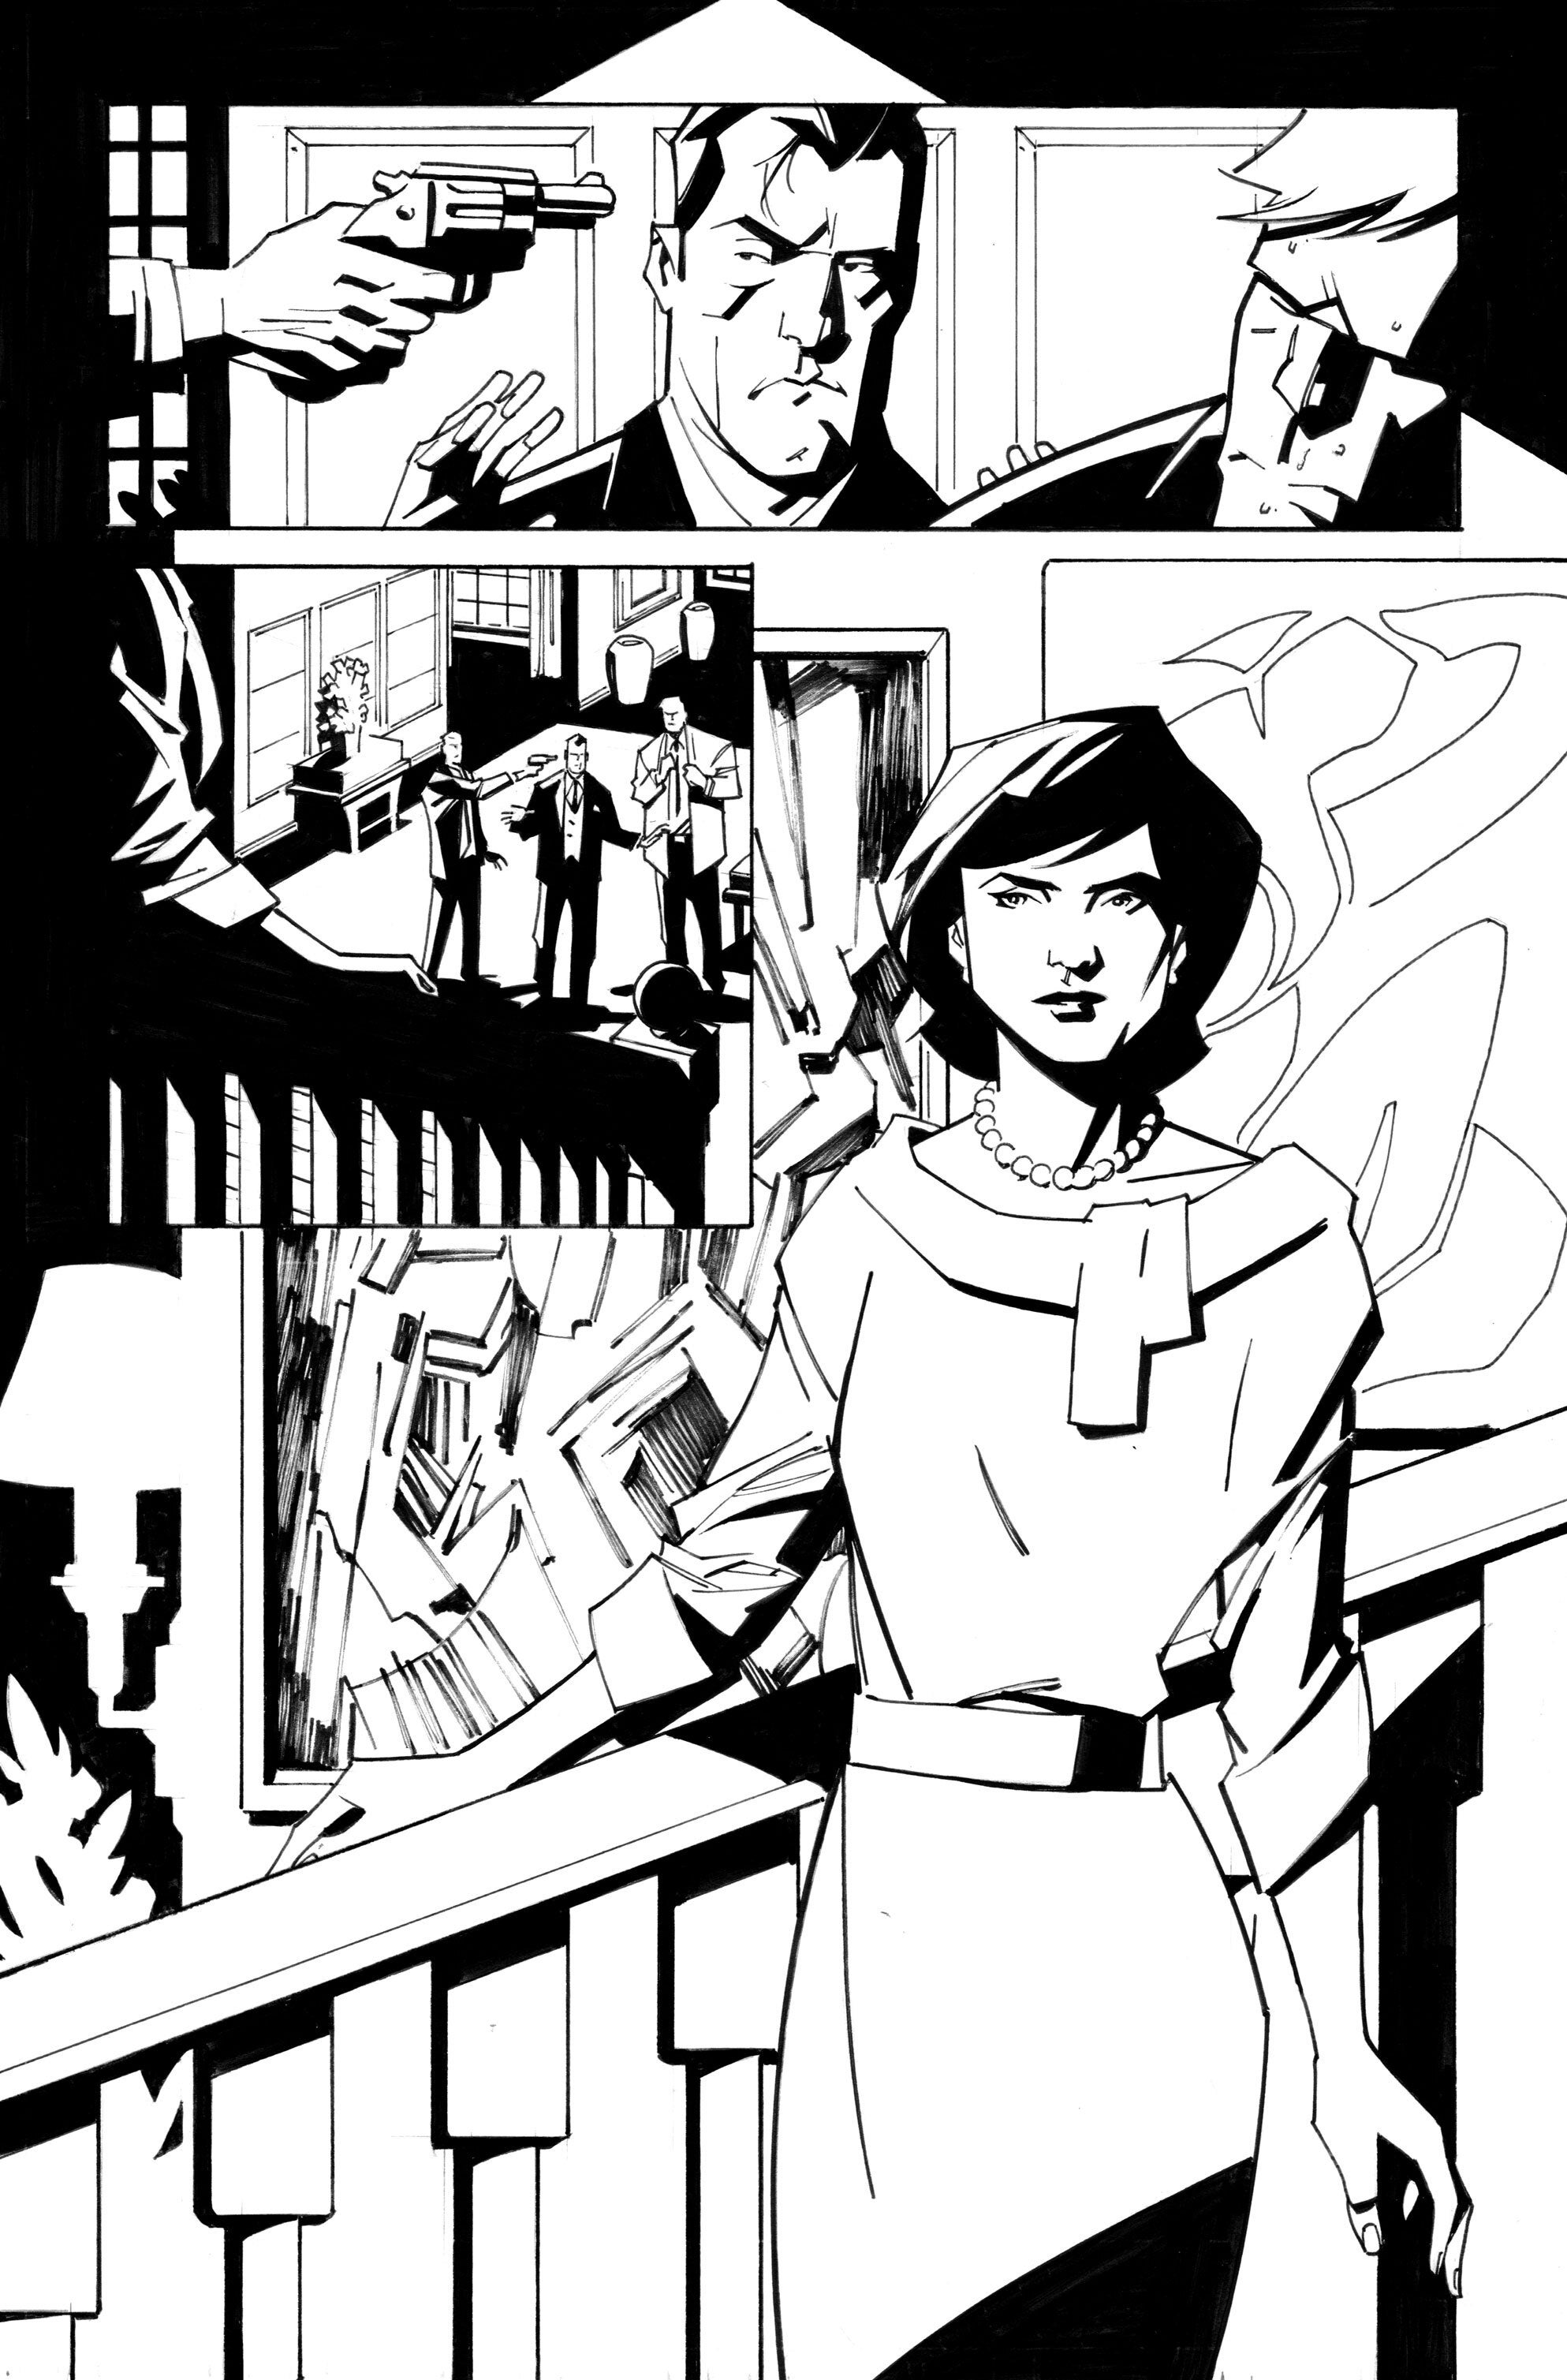 Gotham City: Year One #1 unlettered, uncolored page by Phil Hester & Eric Gapstur